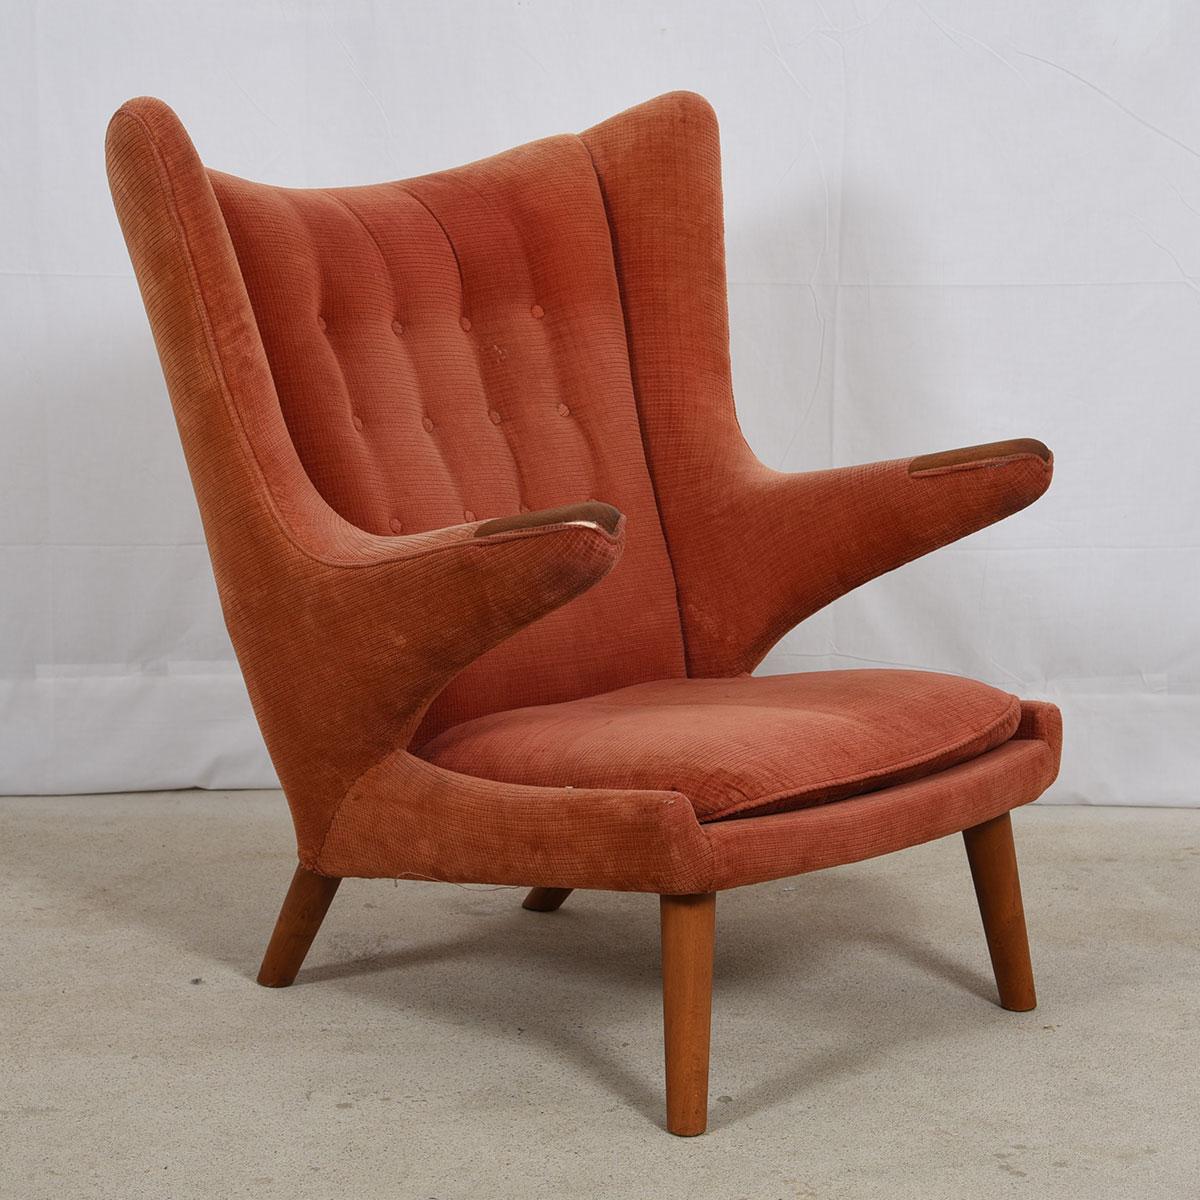 Mid-Century Modern Iconic Papa Bear Wingback Chair by Hans Wegner, 1951 For Sale